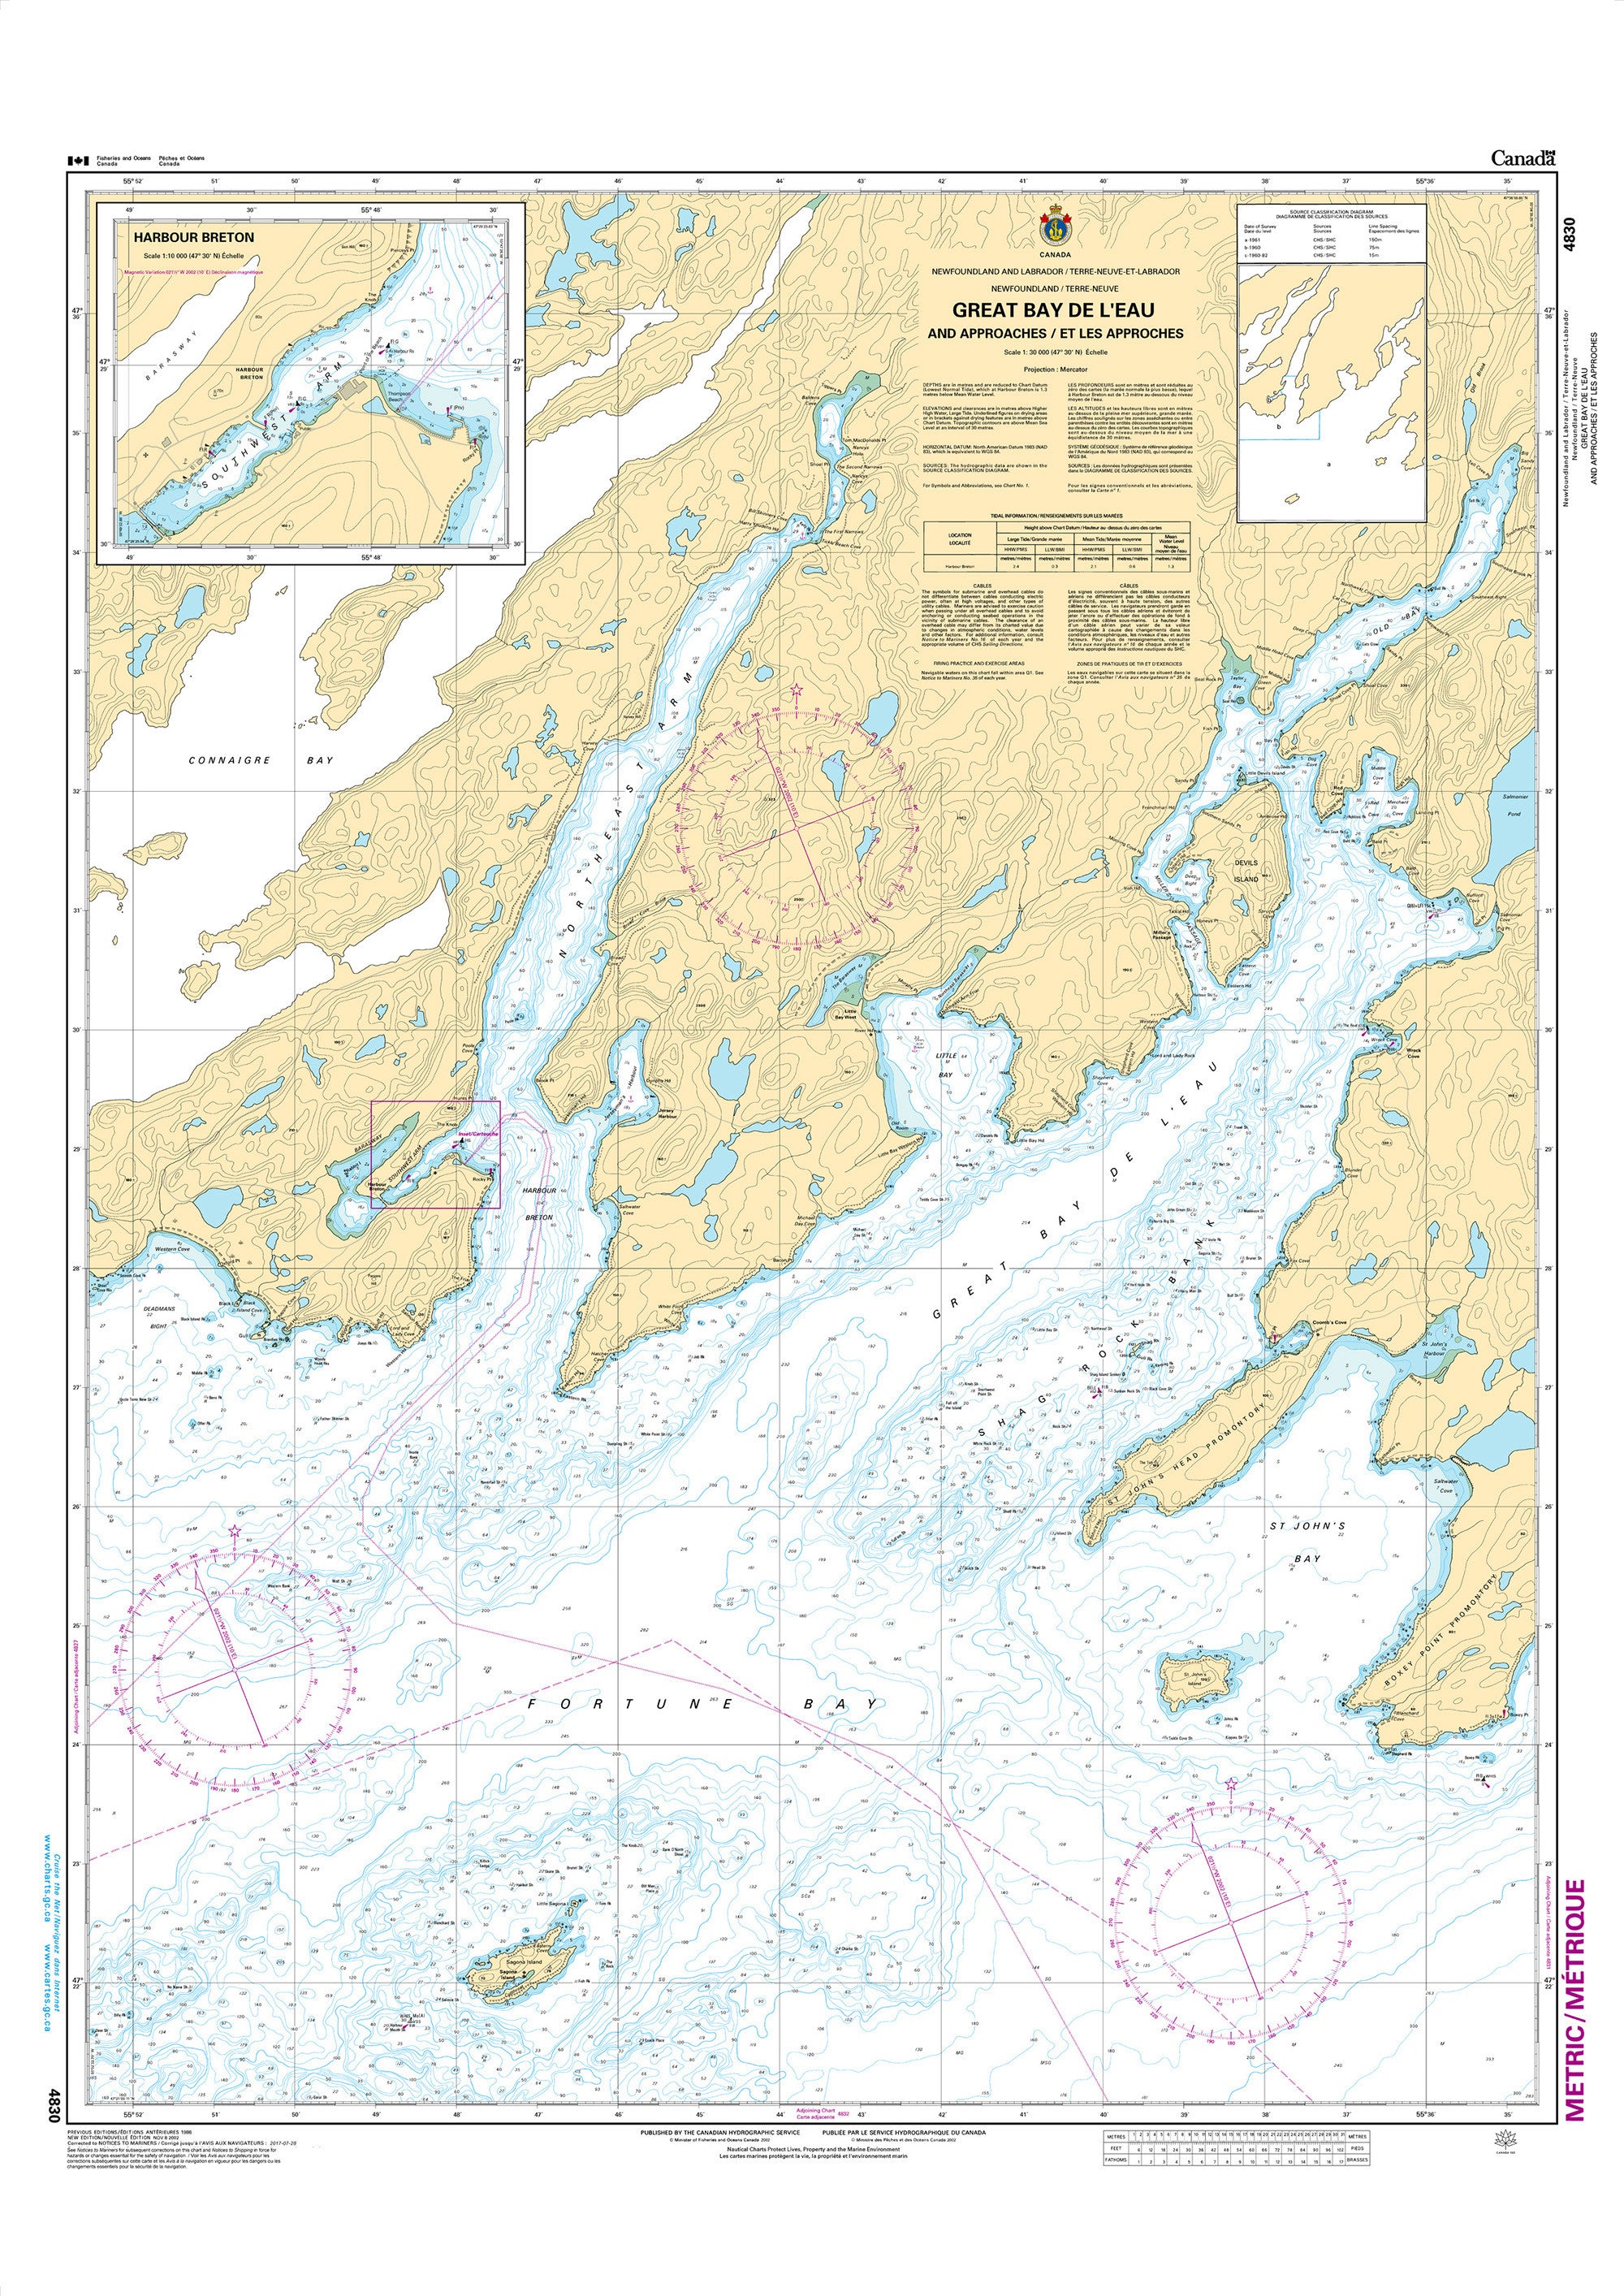 Canadian Hydrographic Service Nautical Chart CHS4830: Great Bay de l'Eau and Approaches/et les approches